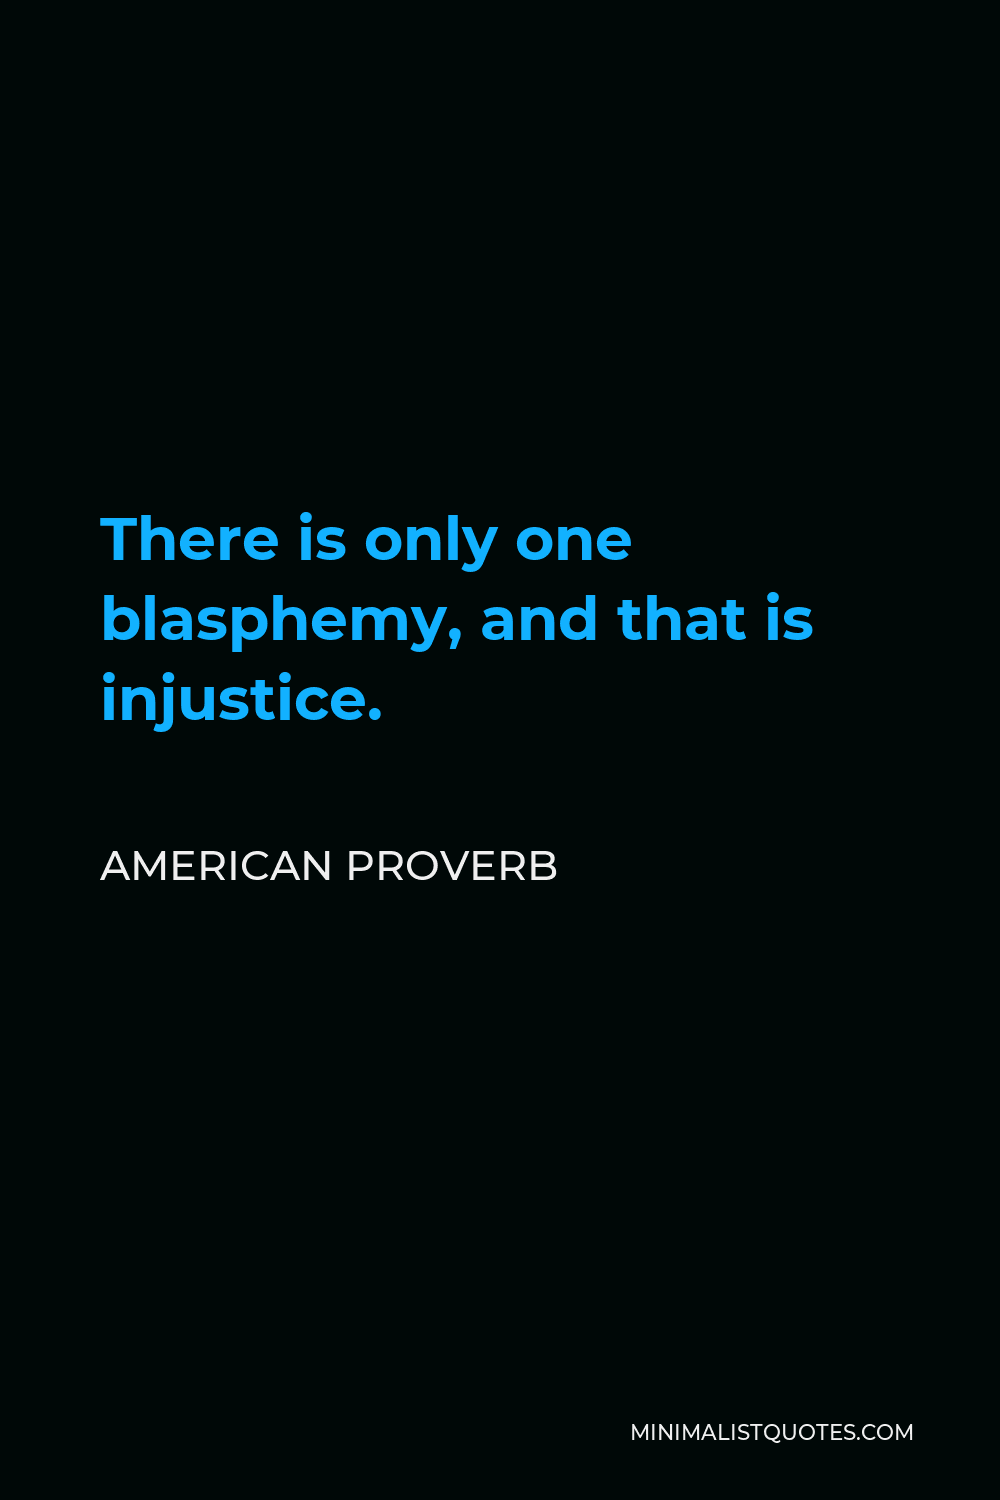 American Proverb Quote - There is only one blasphemy, and that is injustice.